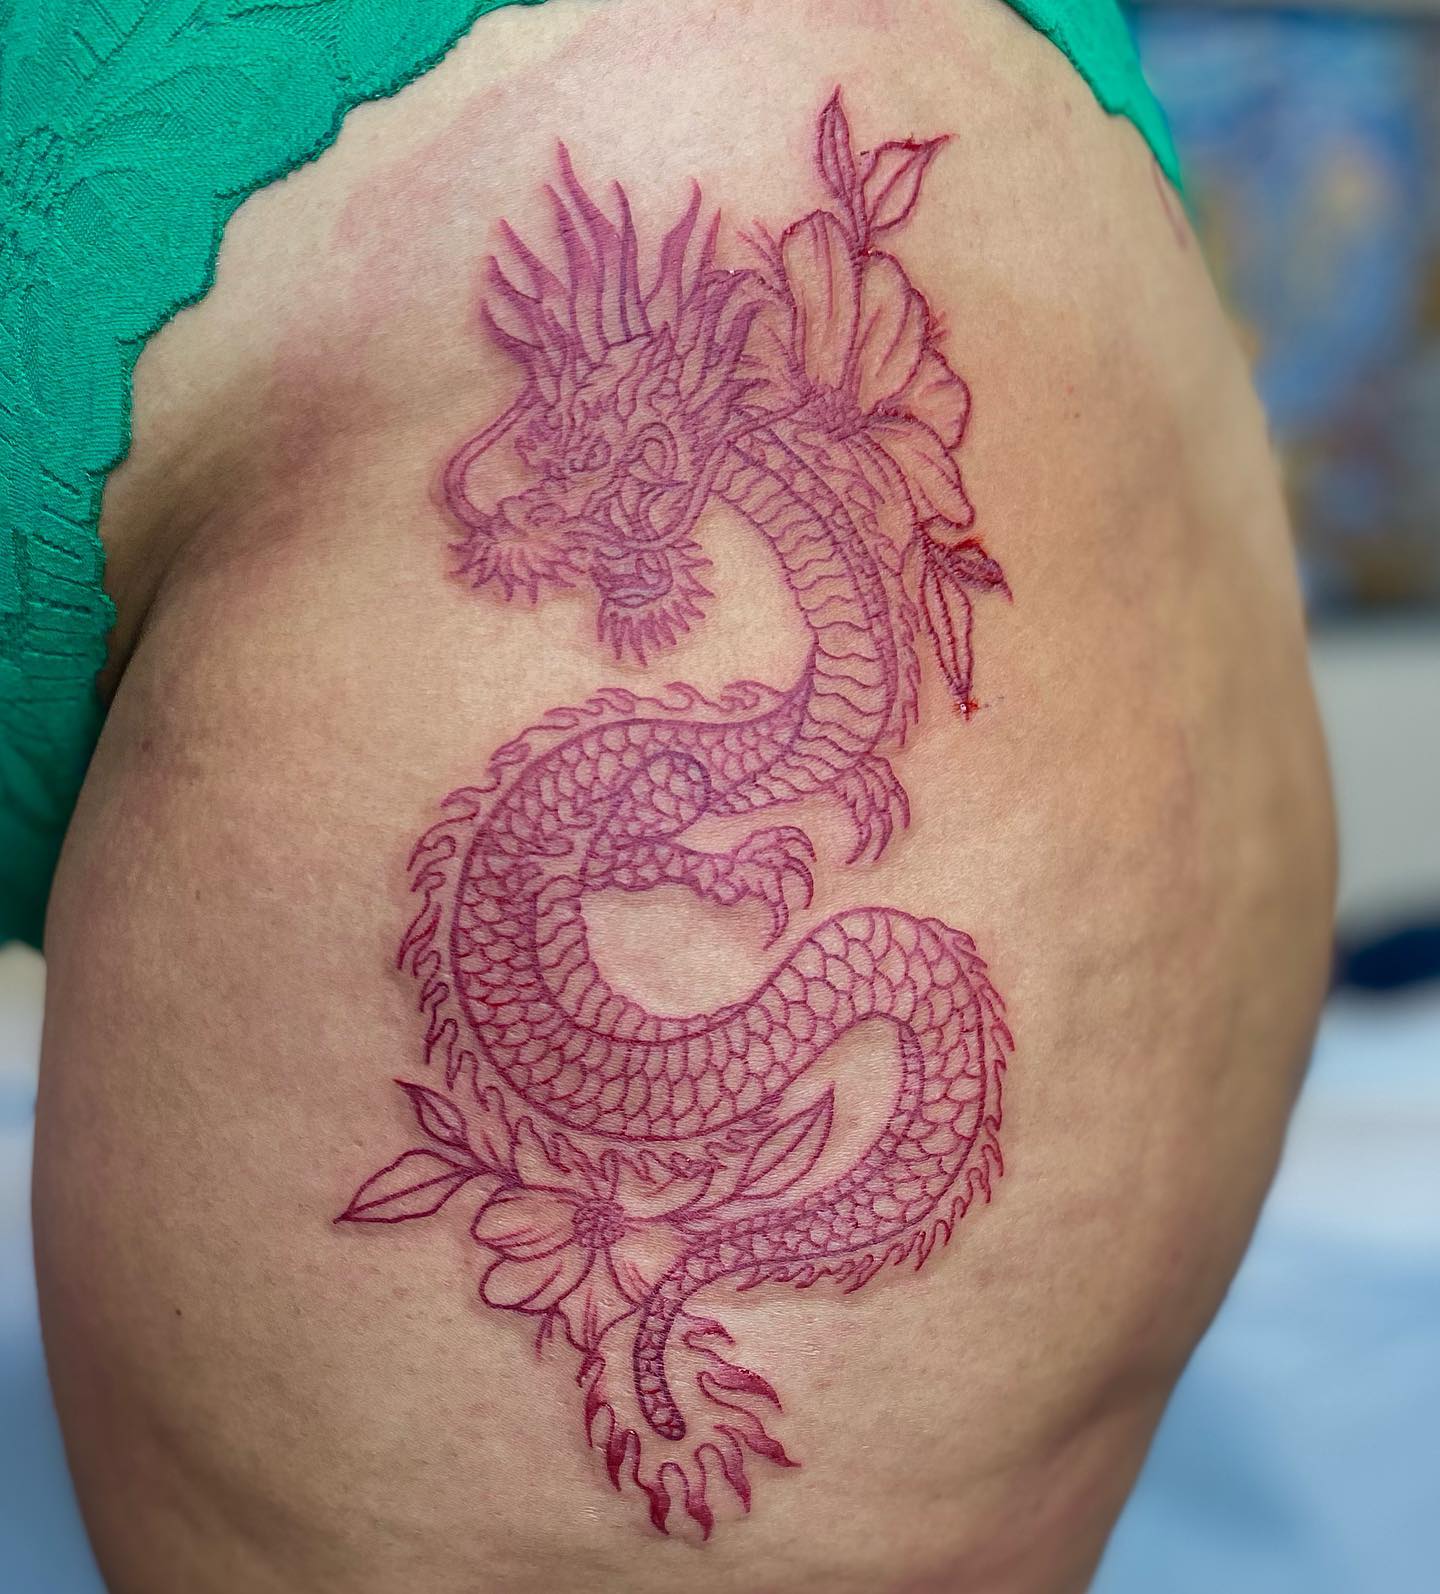 Giant red dragon that will look amazing on elegant and determined women. If you’re a natural leader or a conqueror in your life this large hip tattoo is the one for you.